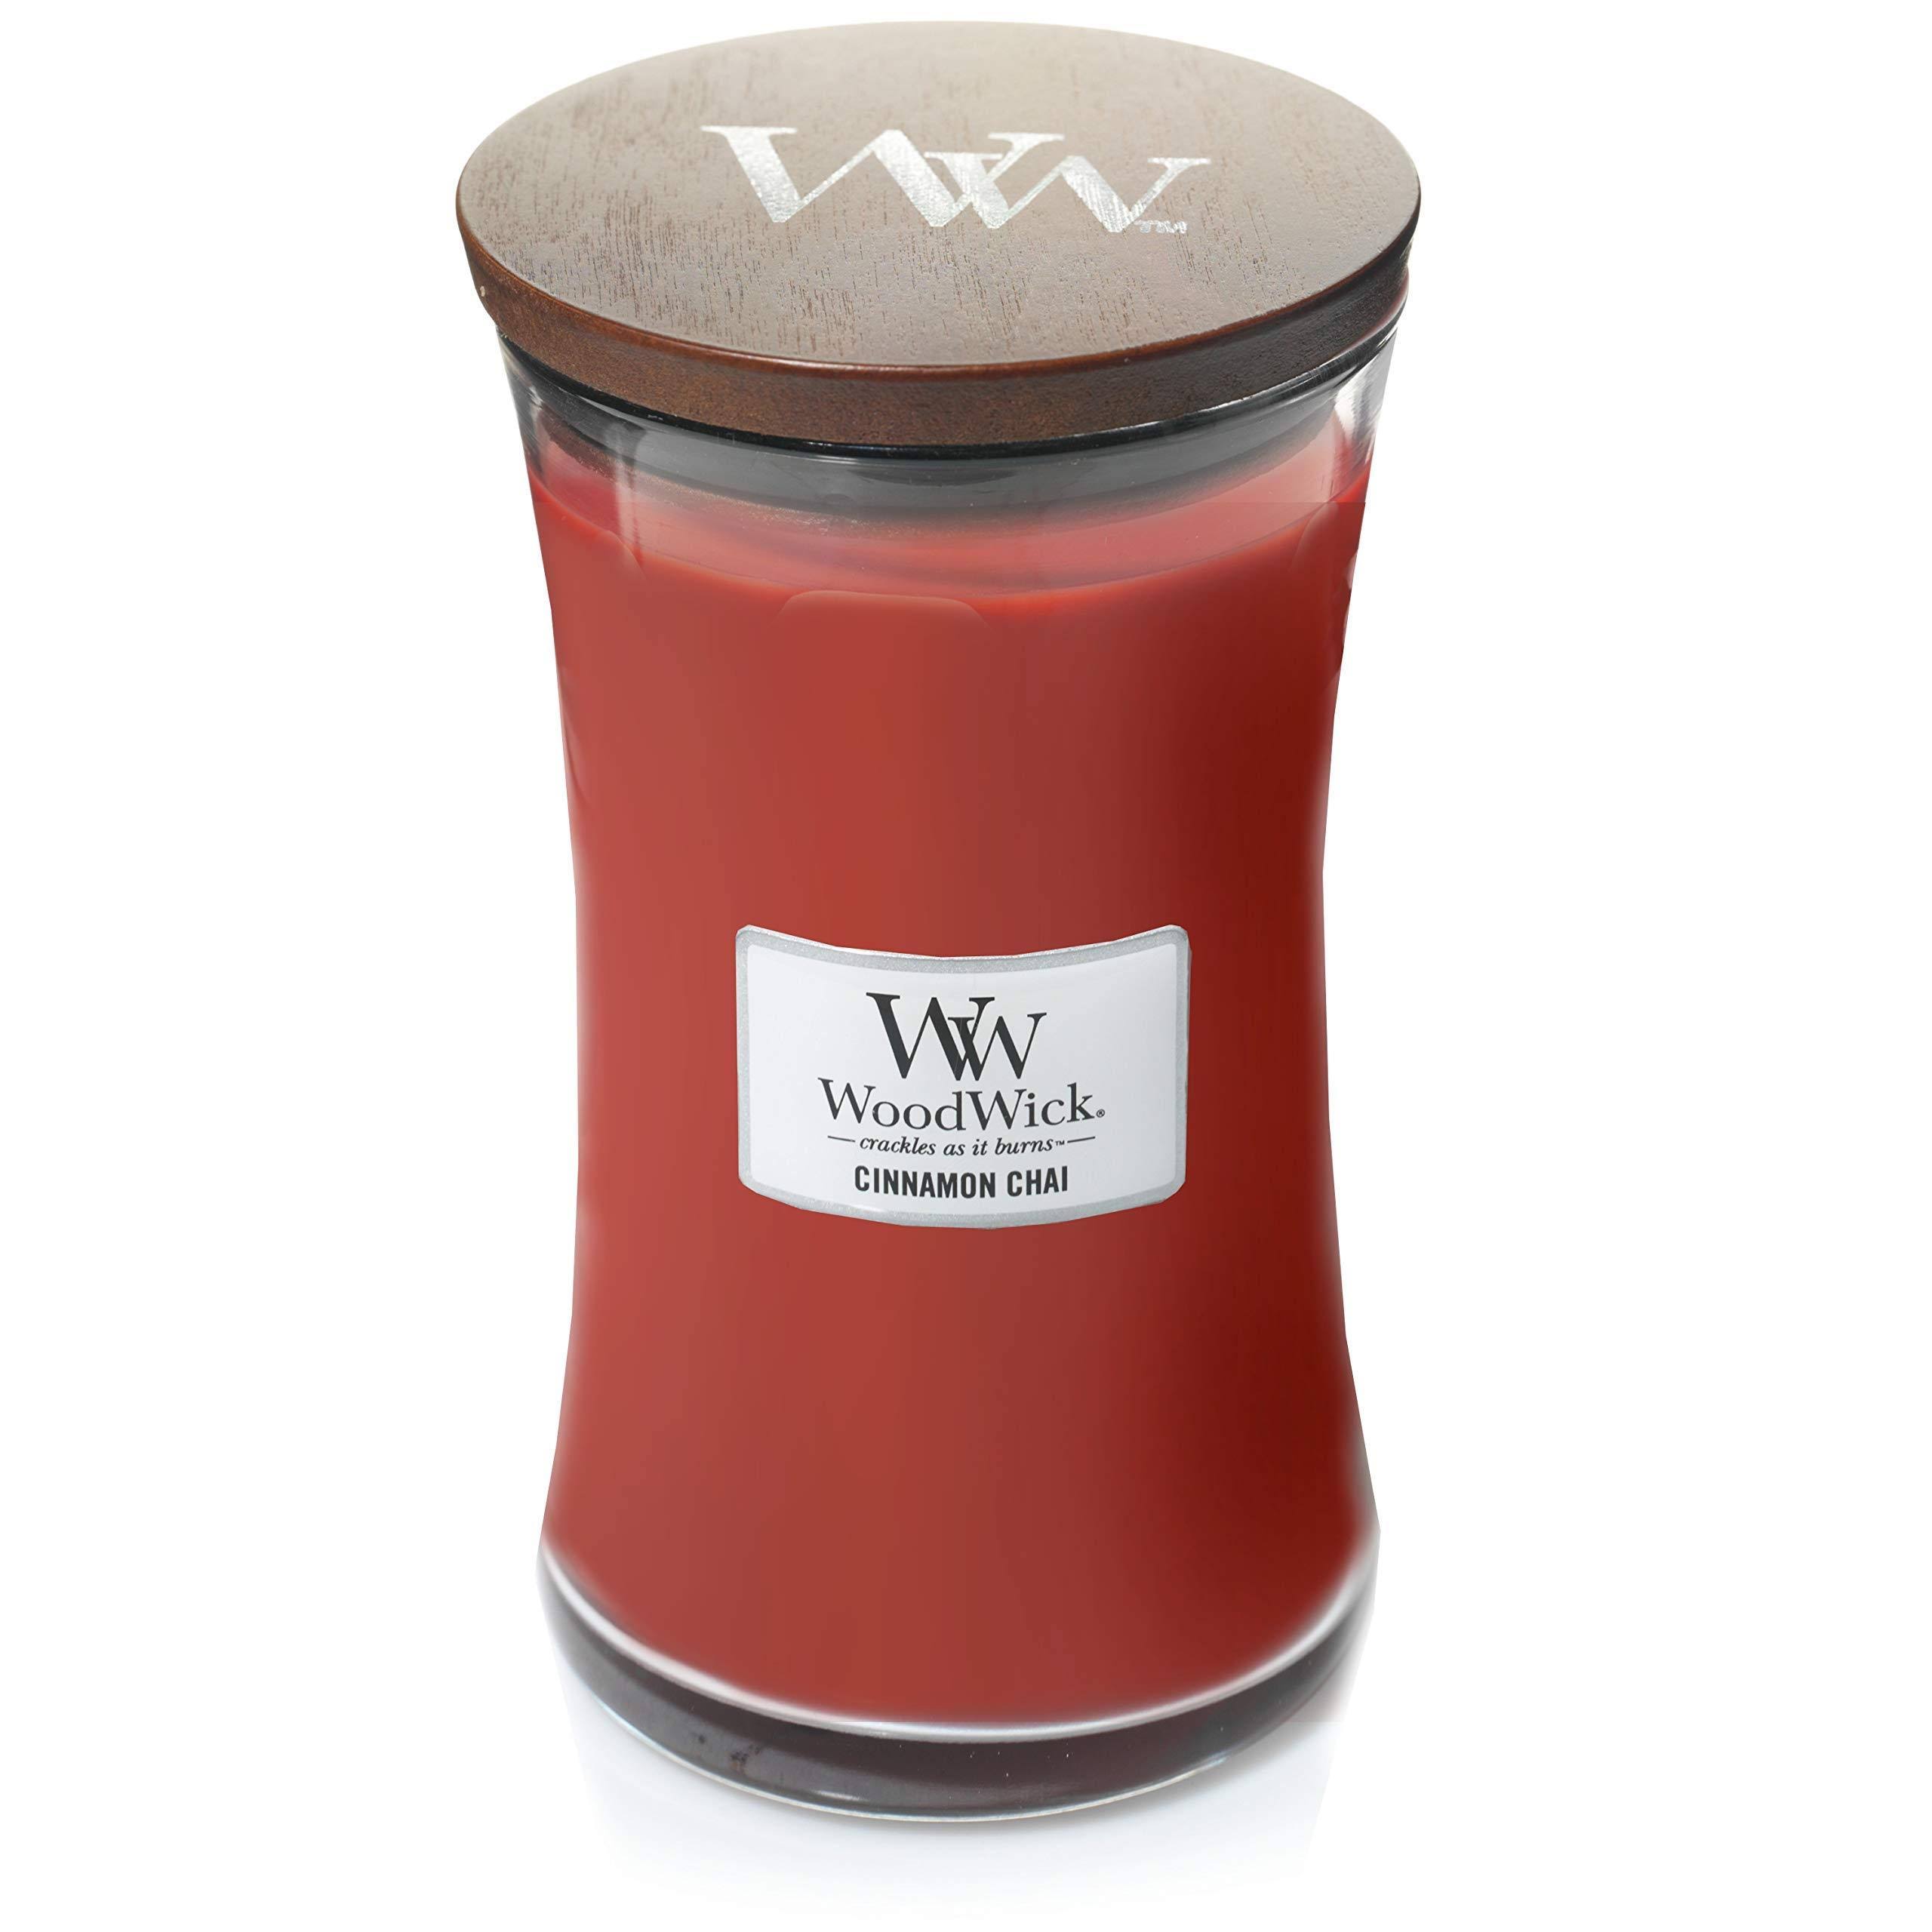 WoodWick Scented Candle - Cinnamon Chai, 22oz